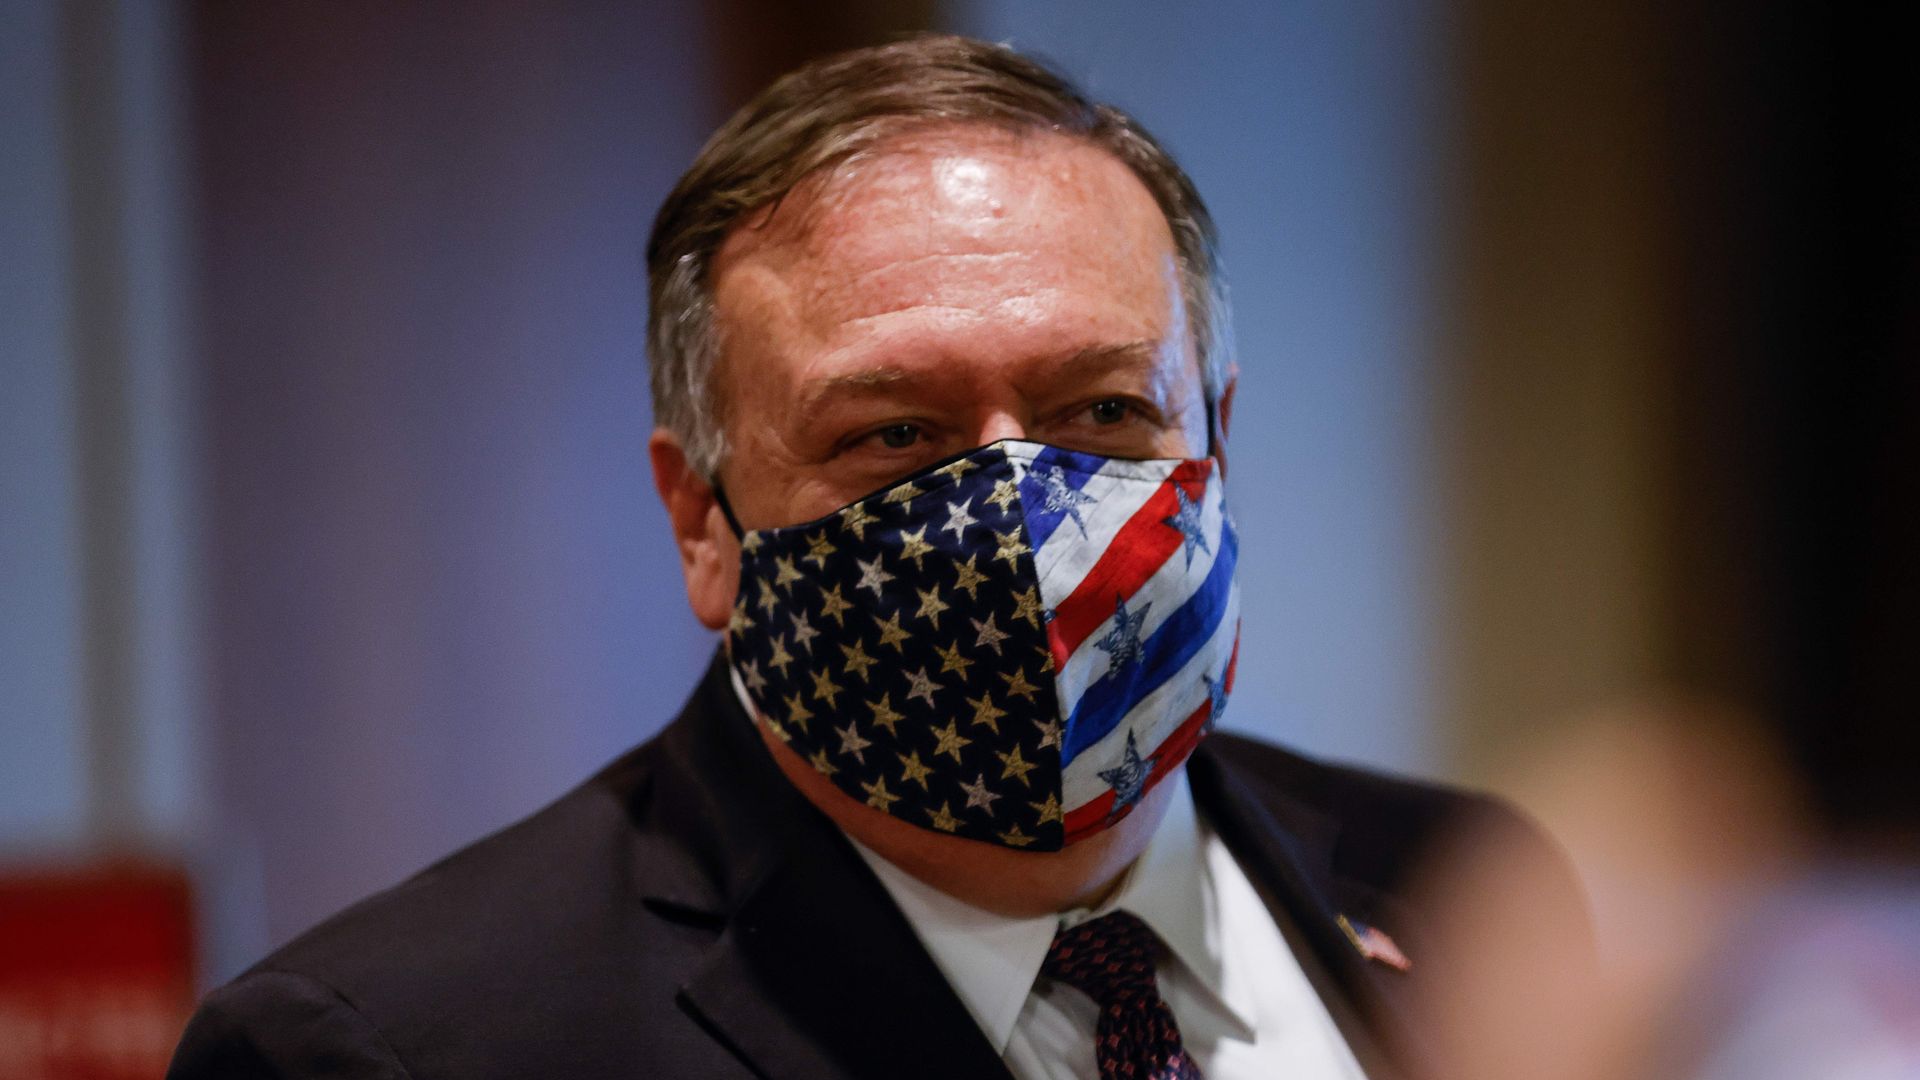  Secretary of State Mike Pompeo departs a meeting with members of the UN Security Council wearing mask